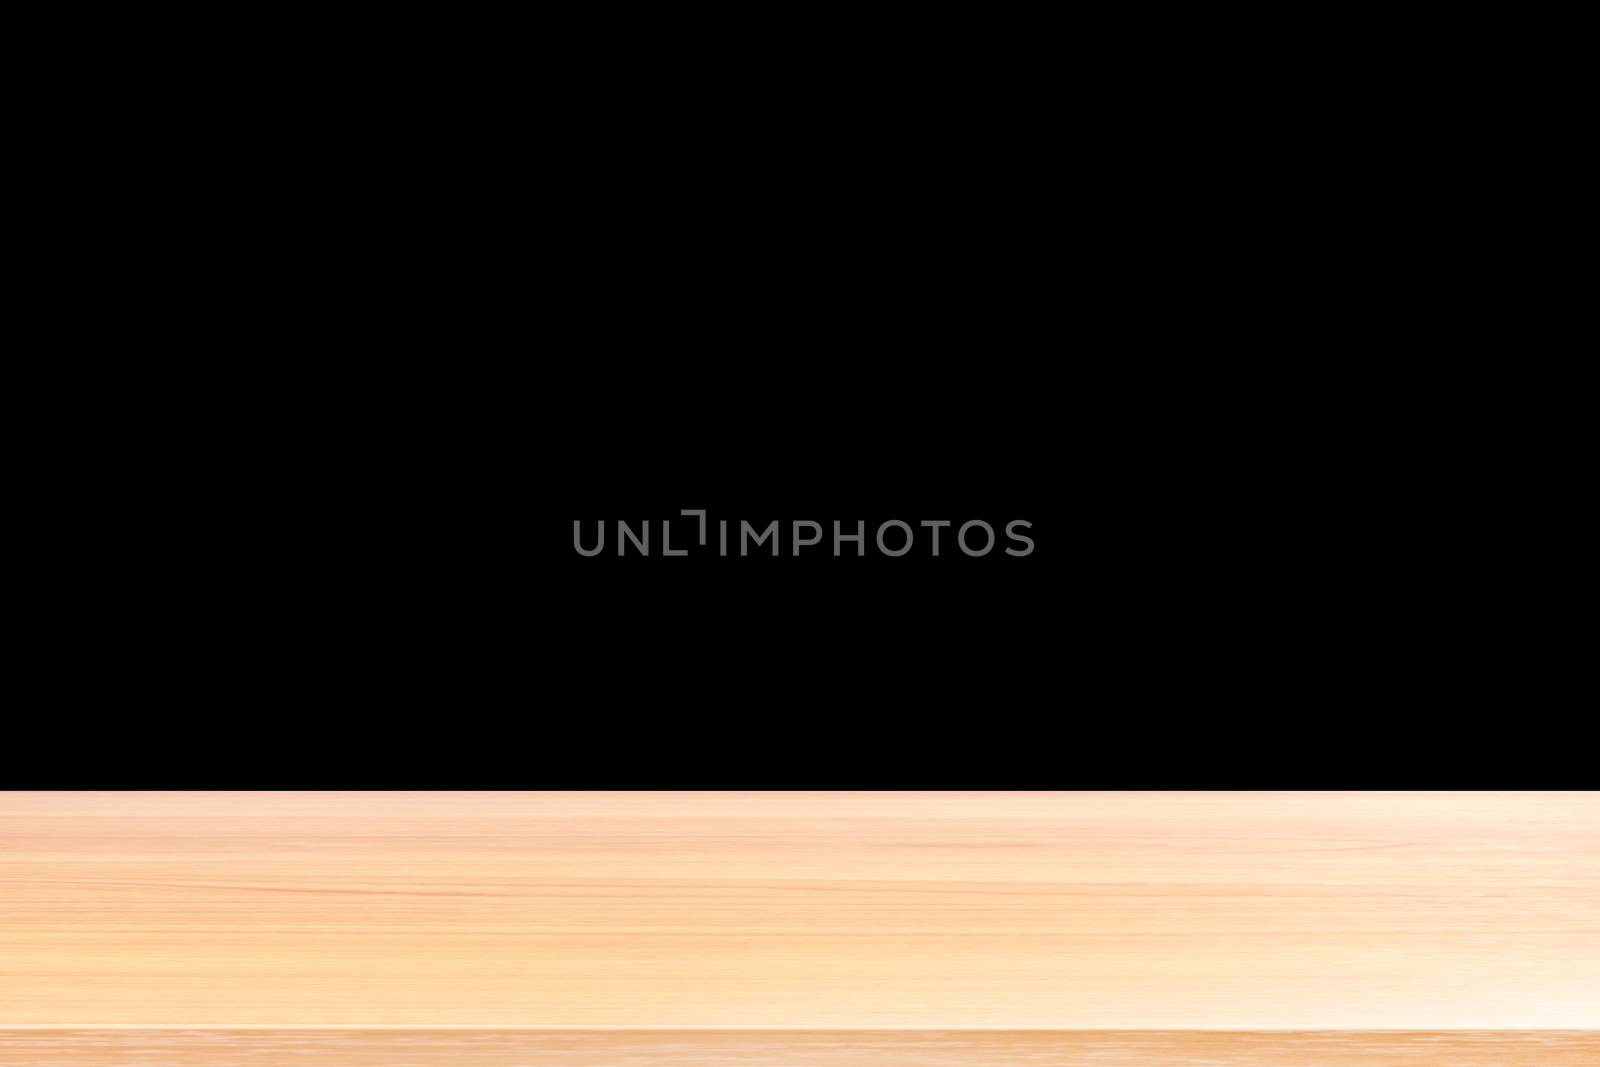 wood floors and black background, wood table board empty in front isolated black background, wooden plank blank on black background with perspective brown wood table for mock up display products